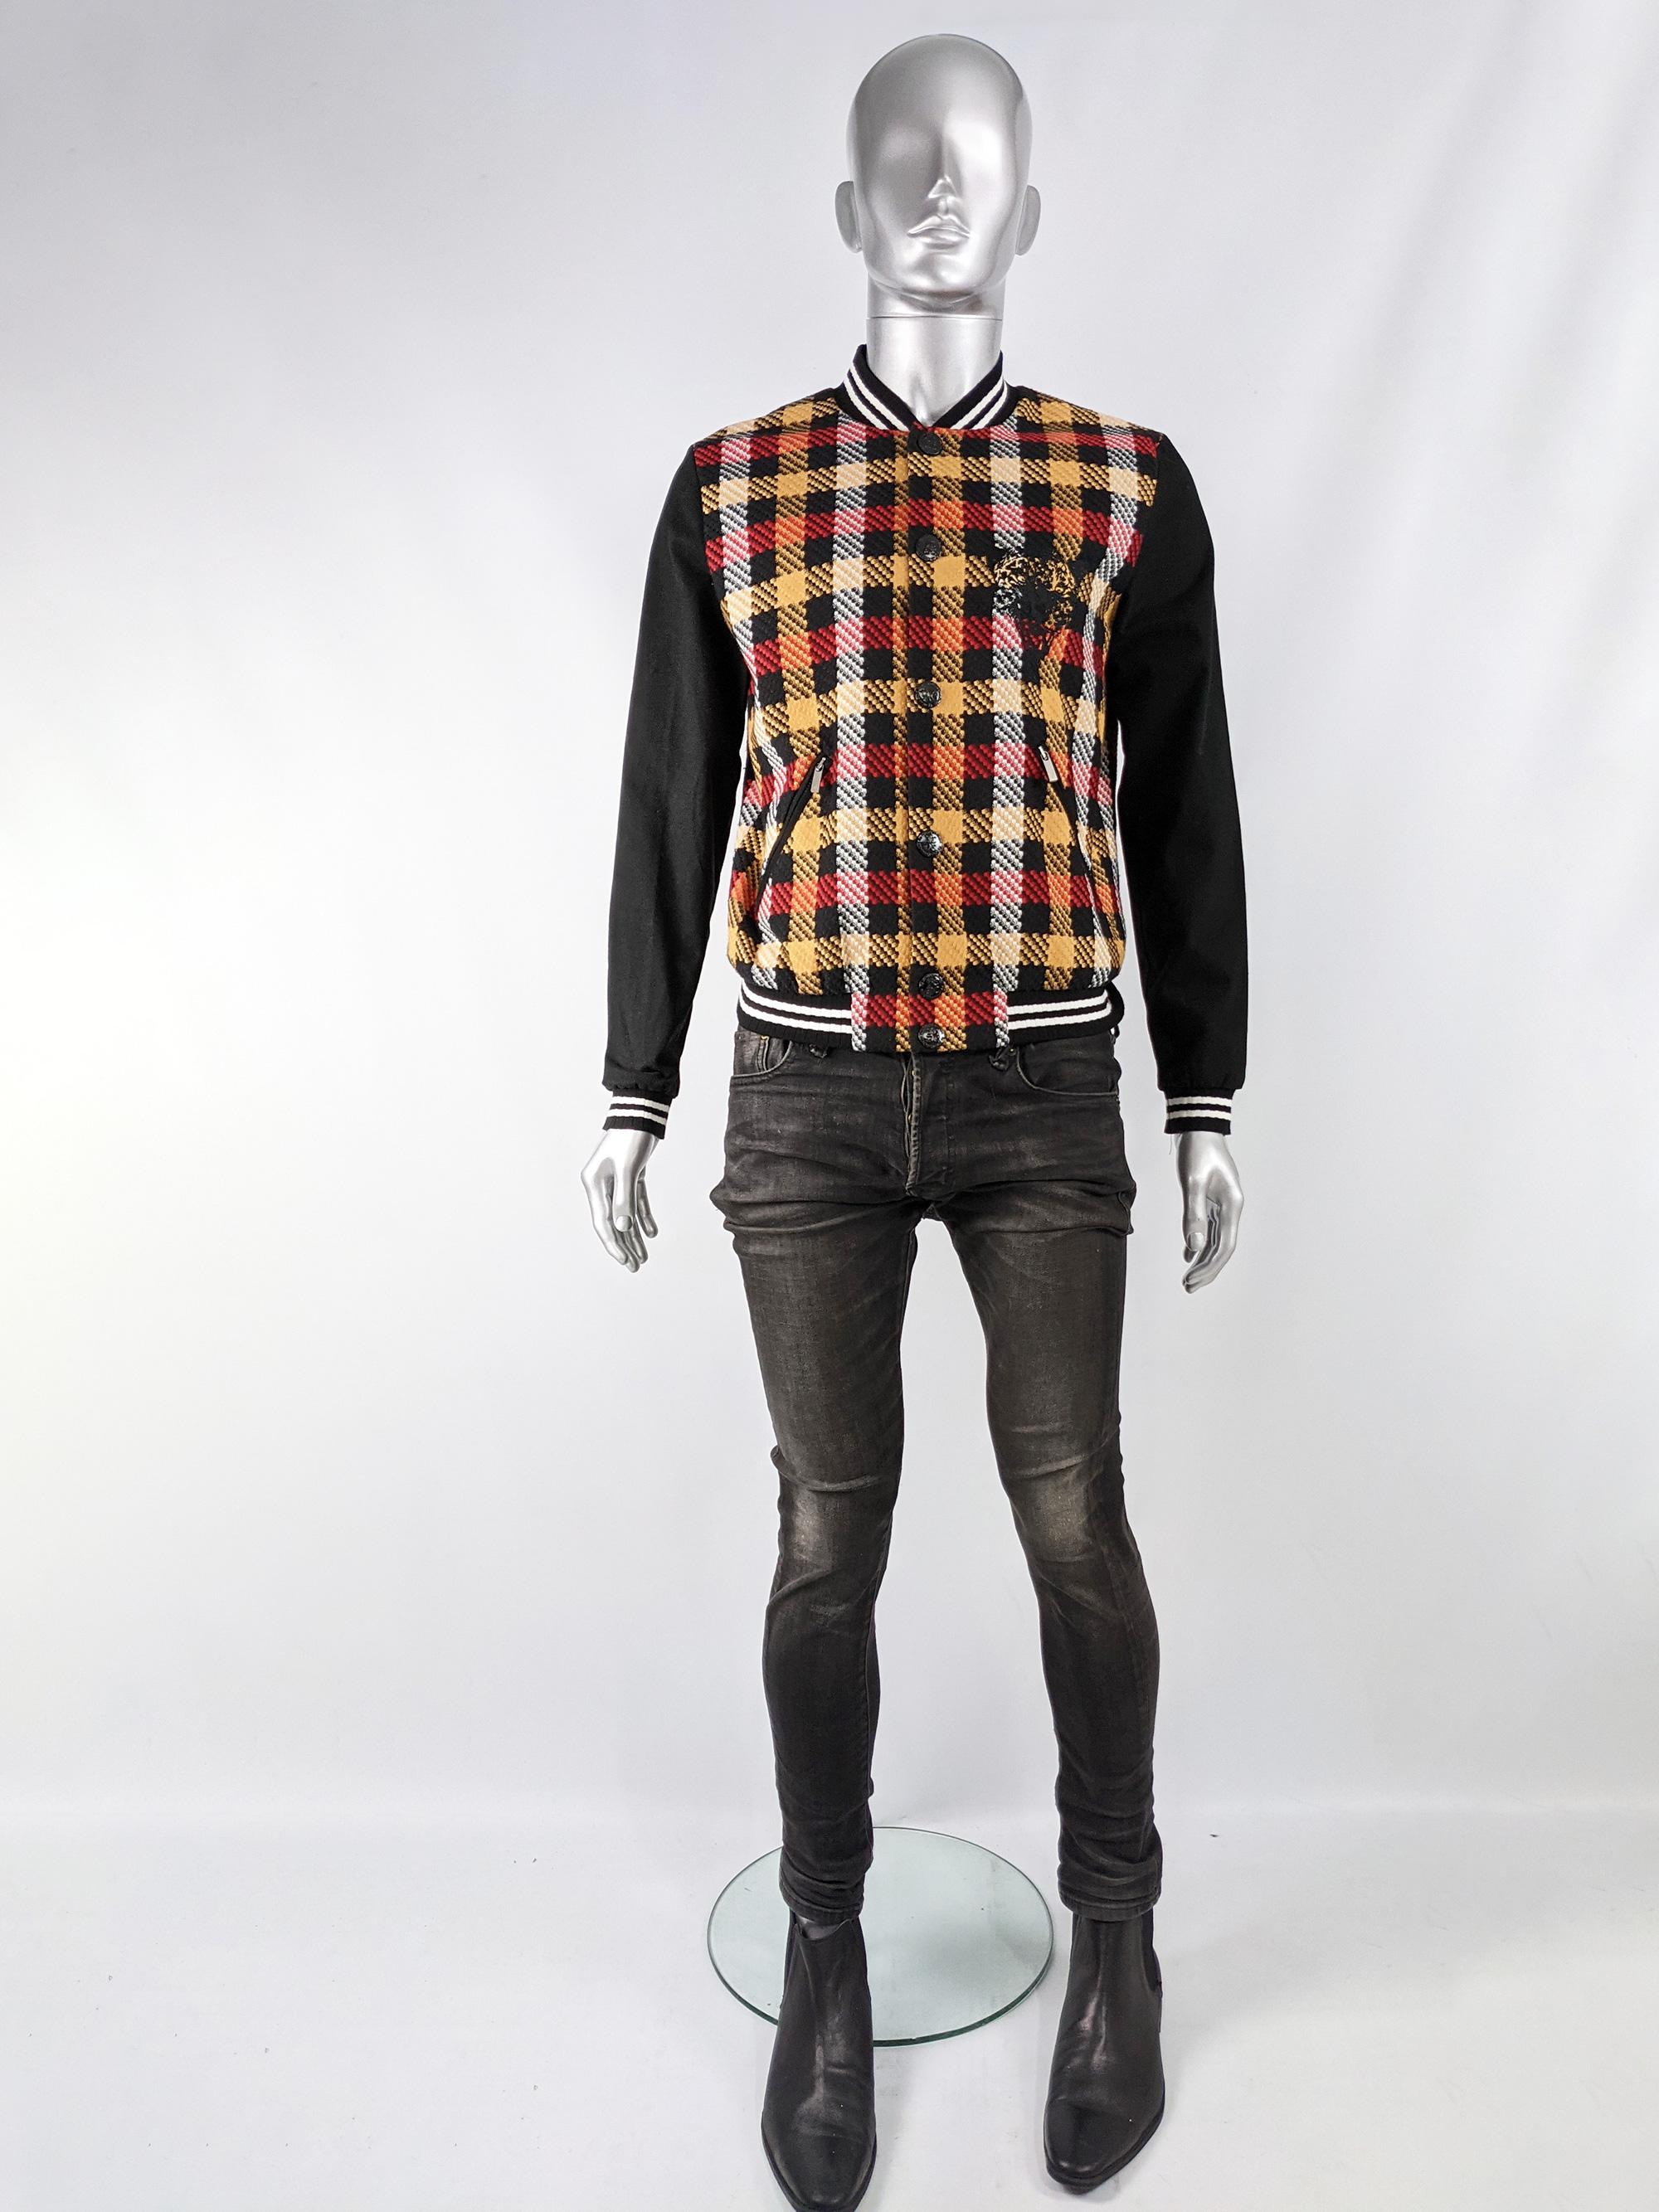 A stylish vintage mens bomber jacket from the 2000s by JC de Castelbajac. In a black fabric with a red and yellow check and a leopard embroidered on the chest.   

Size: Marked EU 48 which equates to a Mens Medium / UK 38